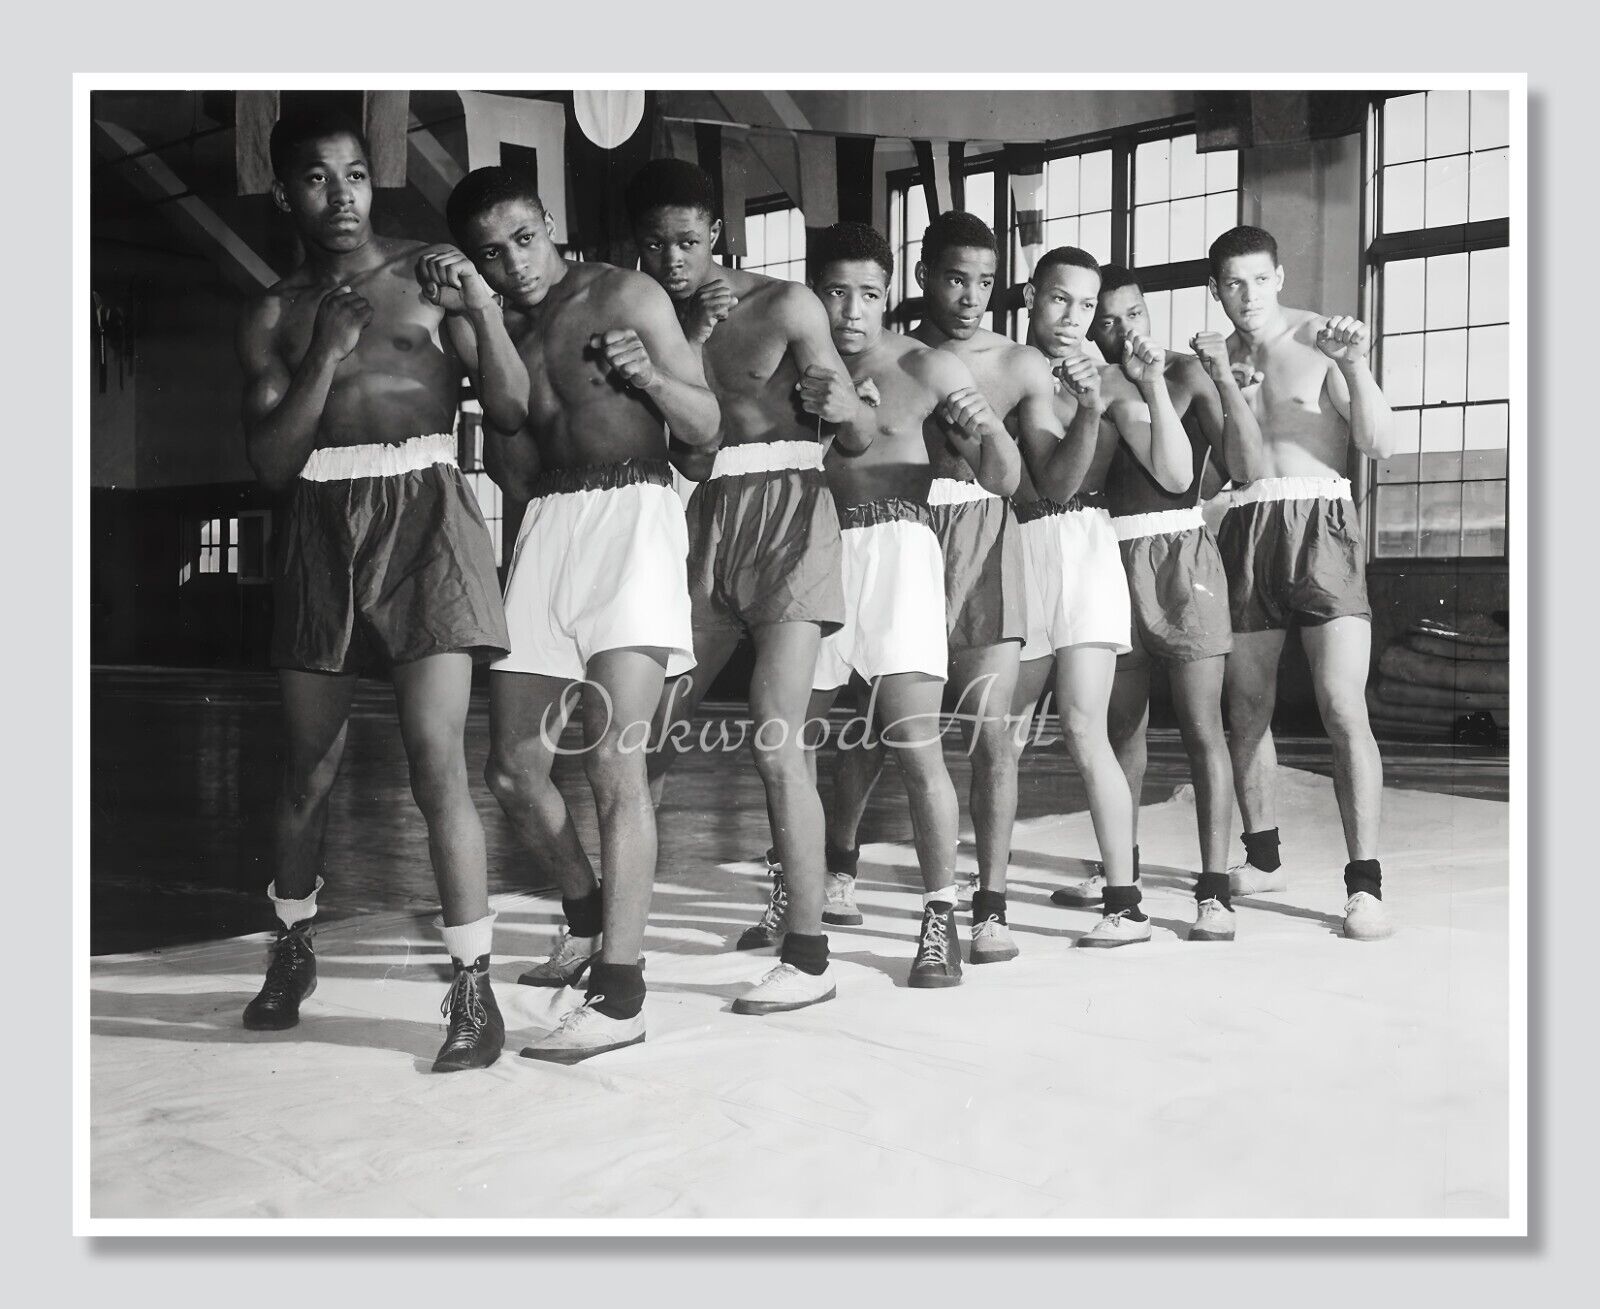 1940s Black Boxers Posing in Boxing Stance, US Navy, Vintage Photo Reprint